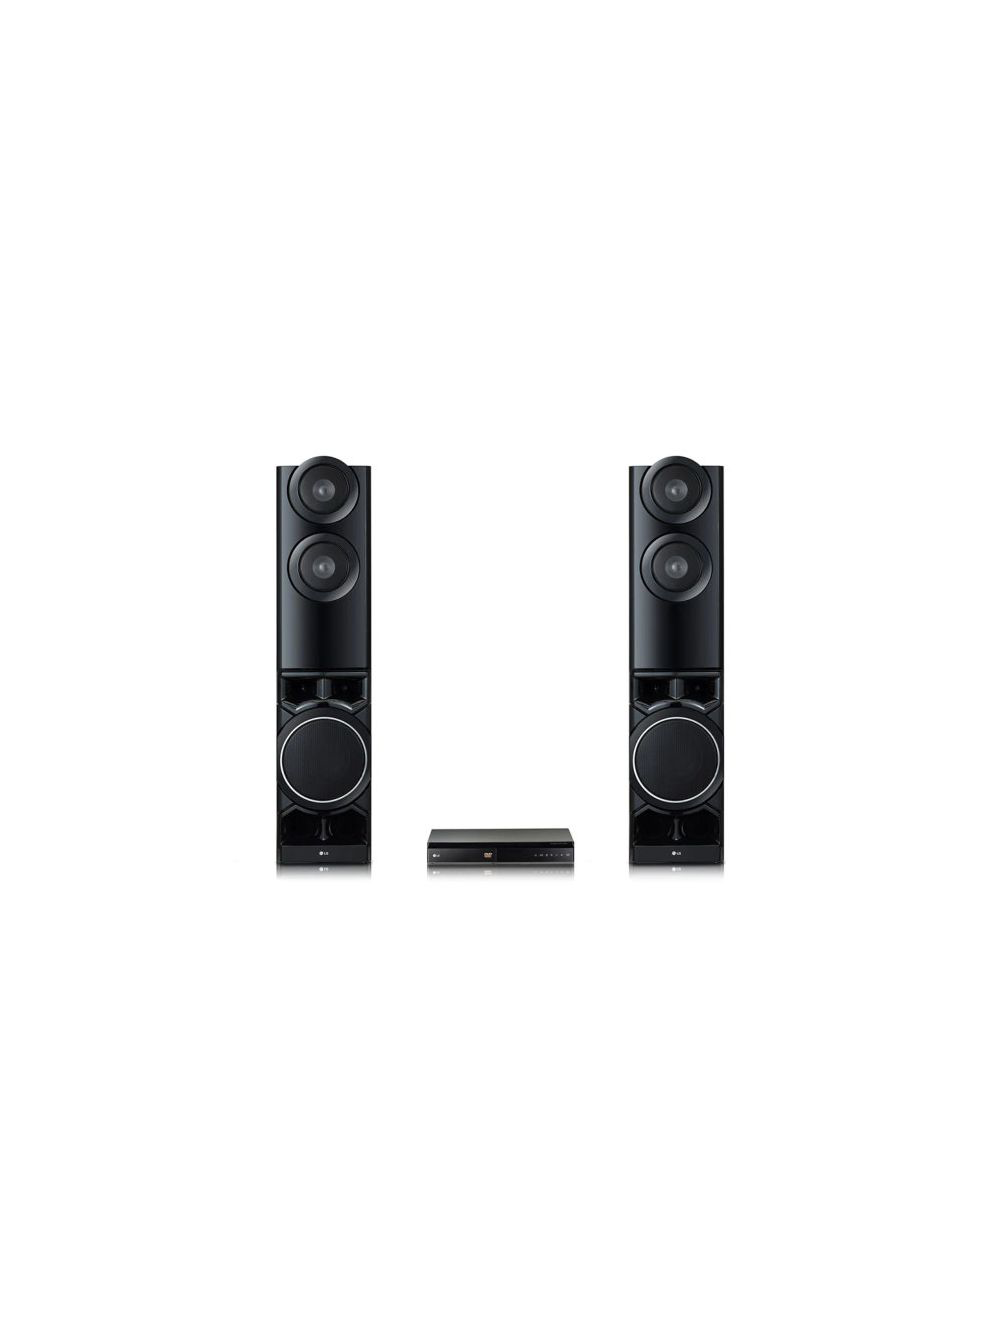 LG LHD687 Home Theater